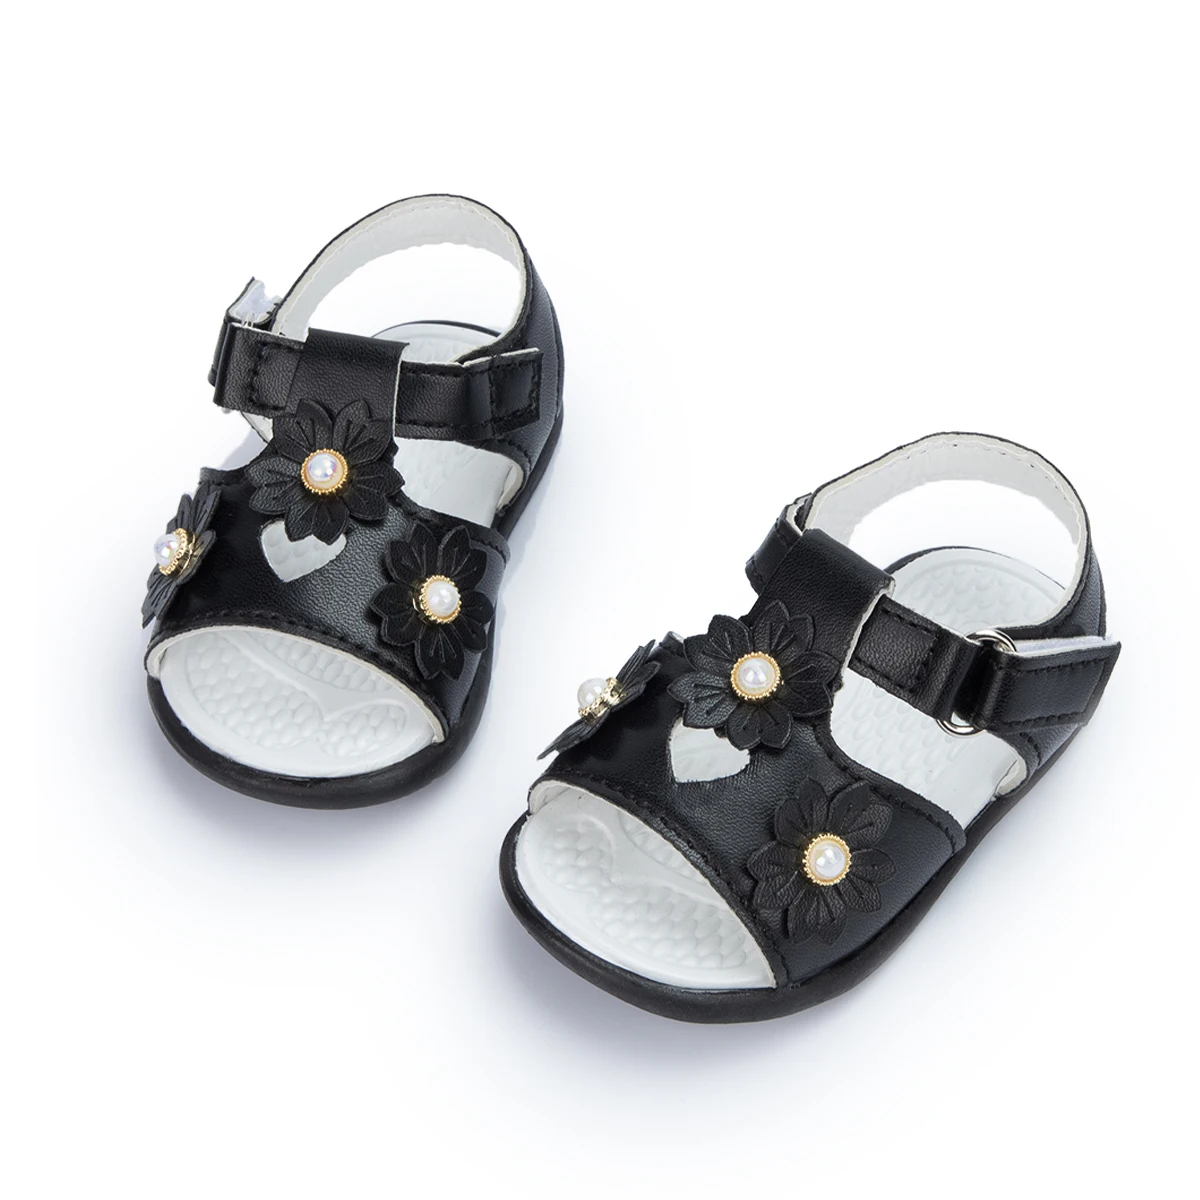 

KIDSUN 2021 New Product Baby Sandals Flower Leather Rubber Sole Flat Summer Outside Baby Girls Sandals Toddler First Walkers